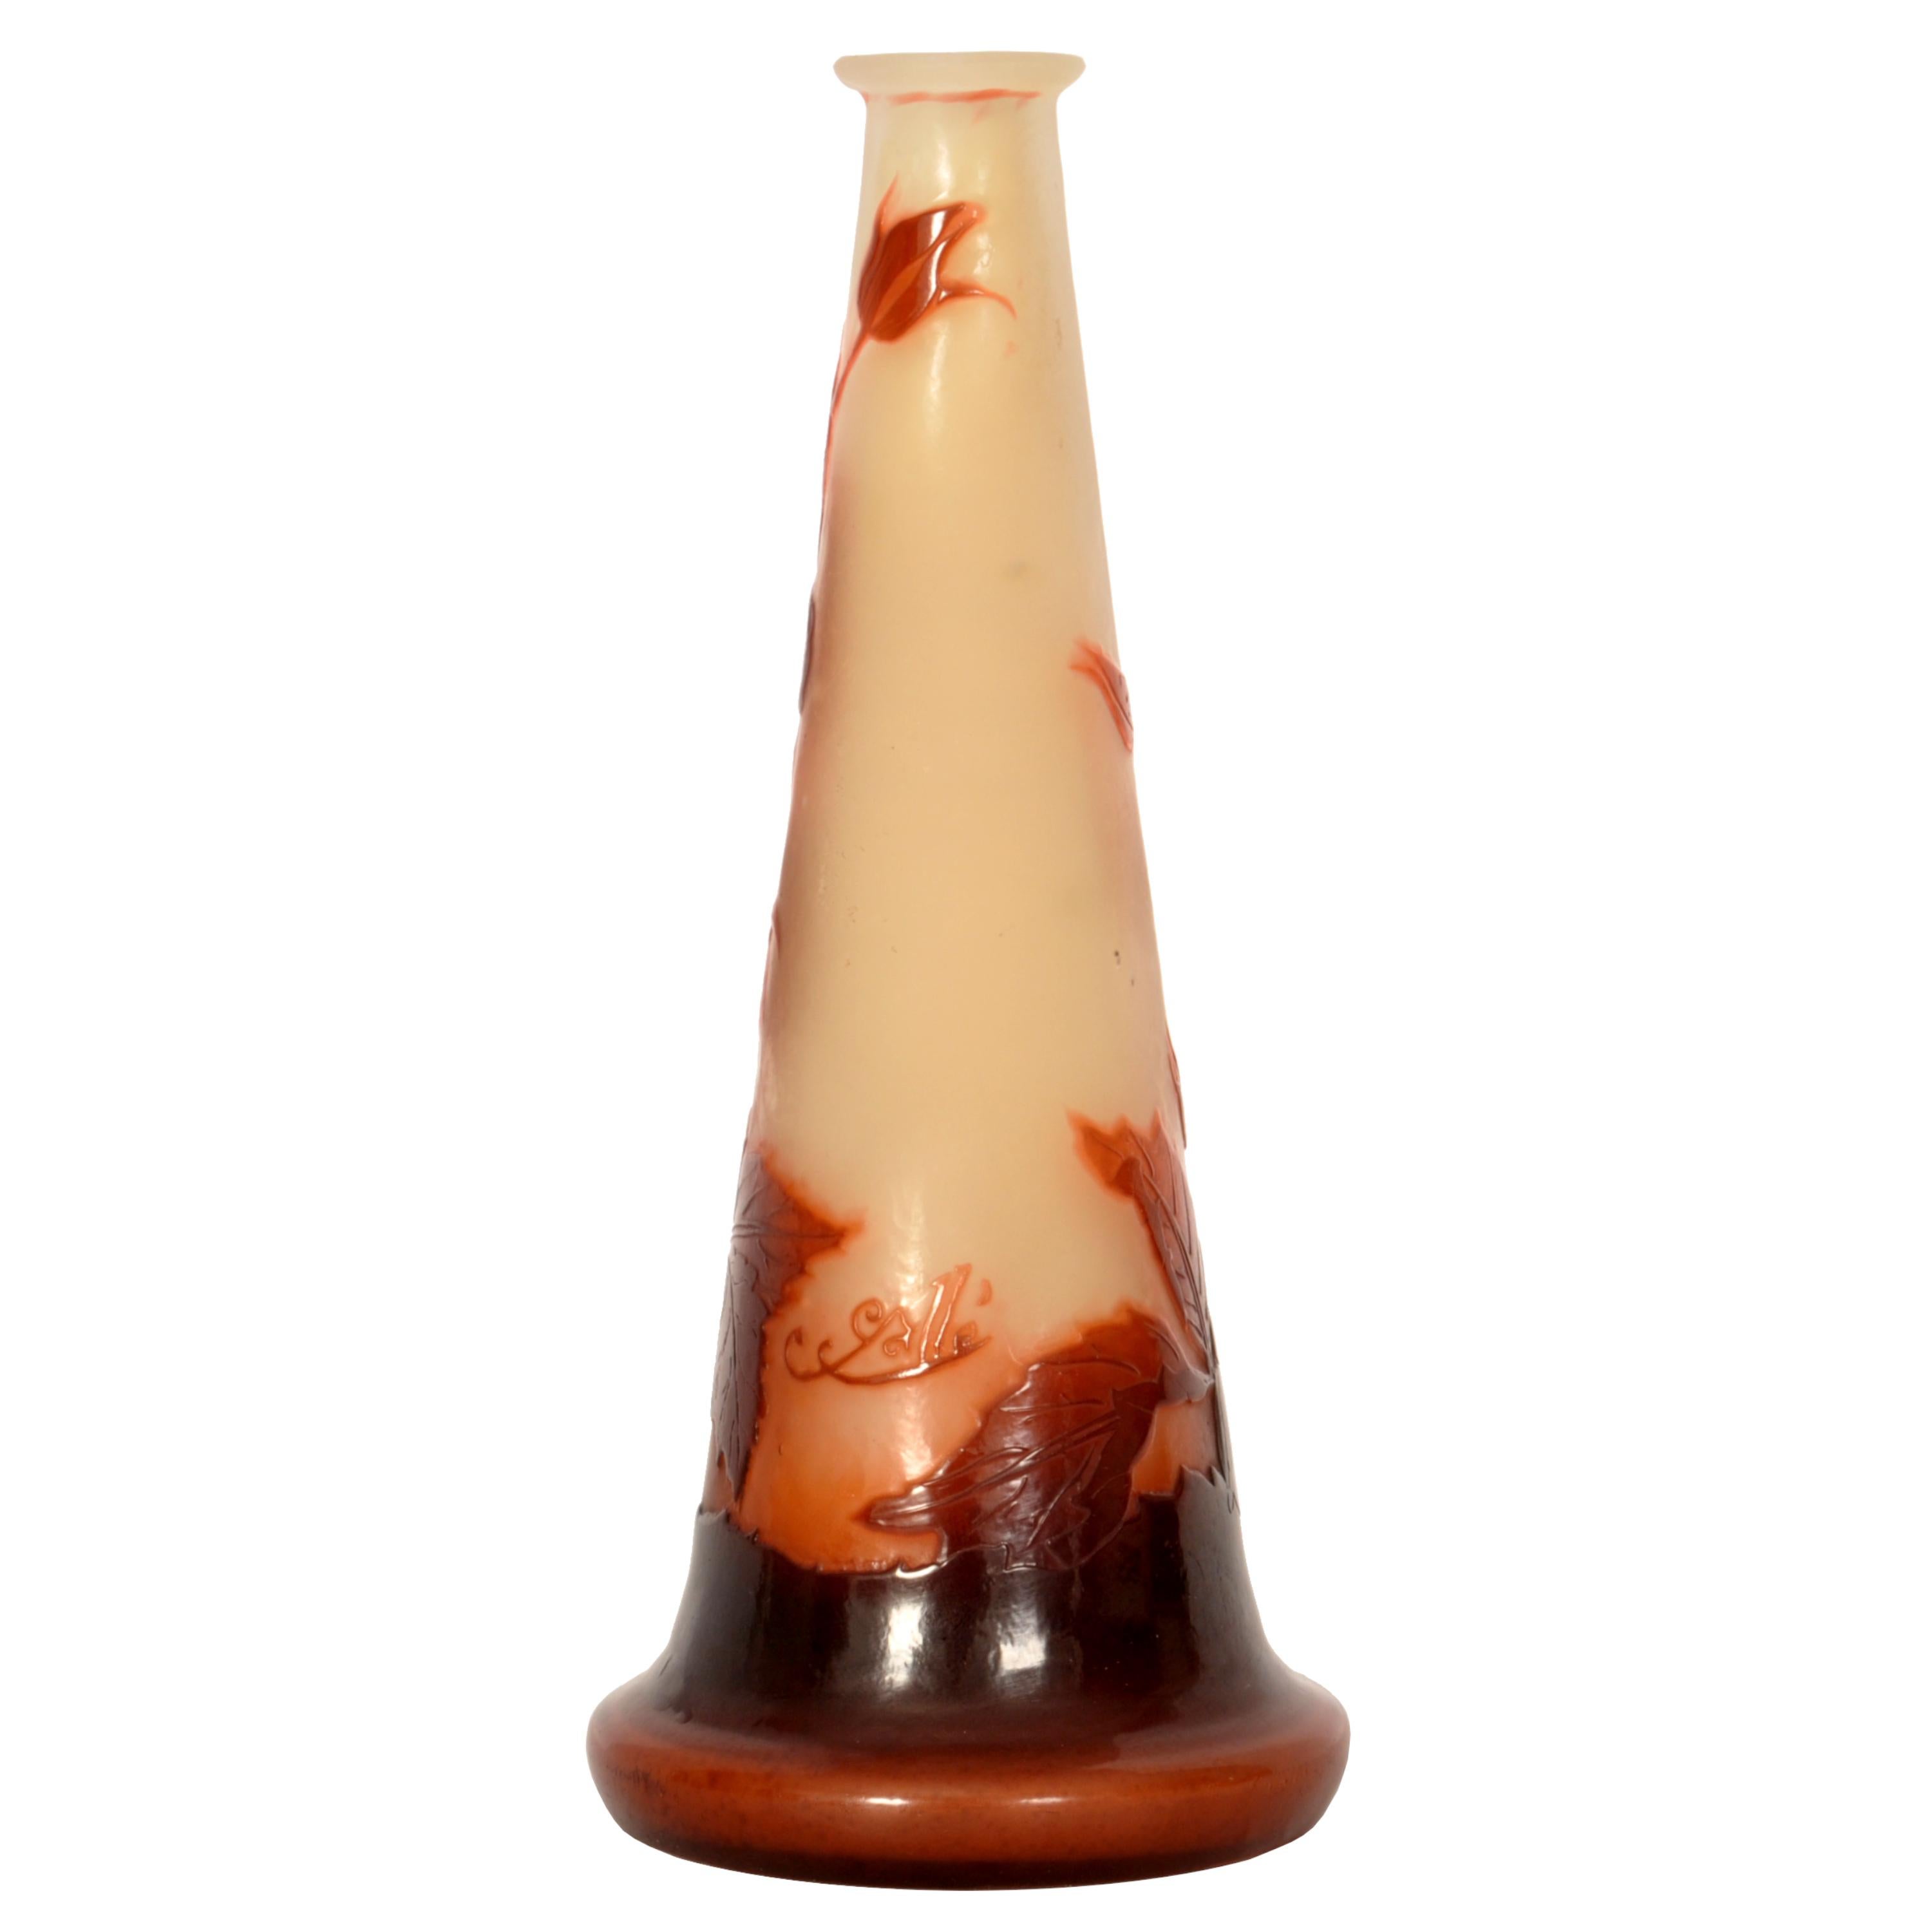 Antique French Art Nouveau Fire Polished Cameo Glass Emile Gallé Stem Vase, 1900 In Good Condition For Sale In Portland, OR